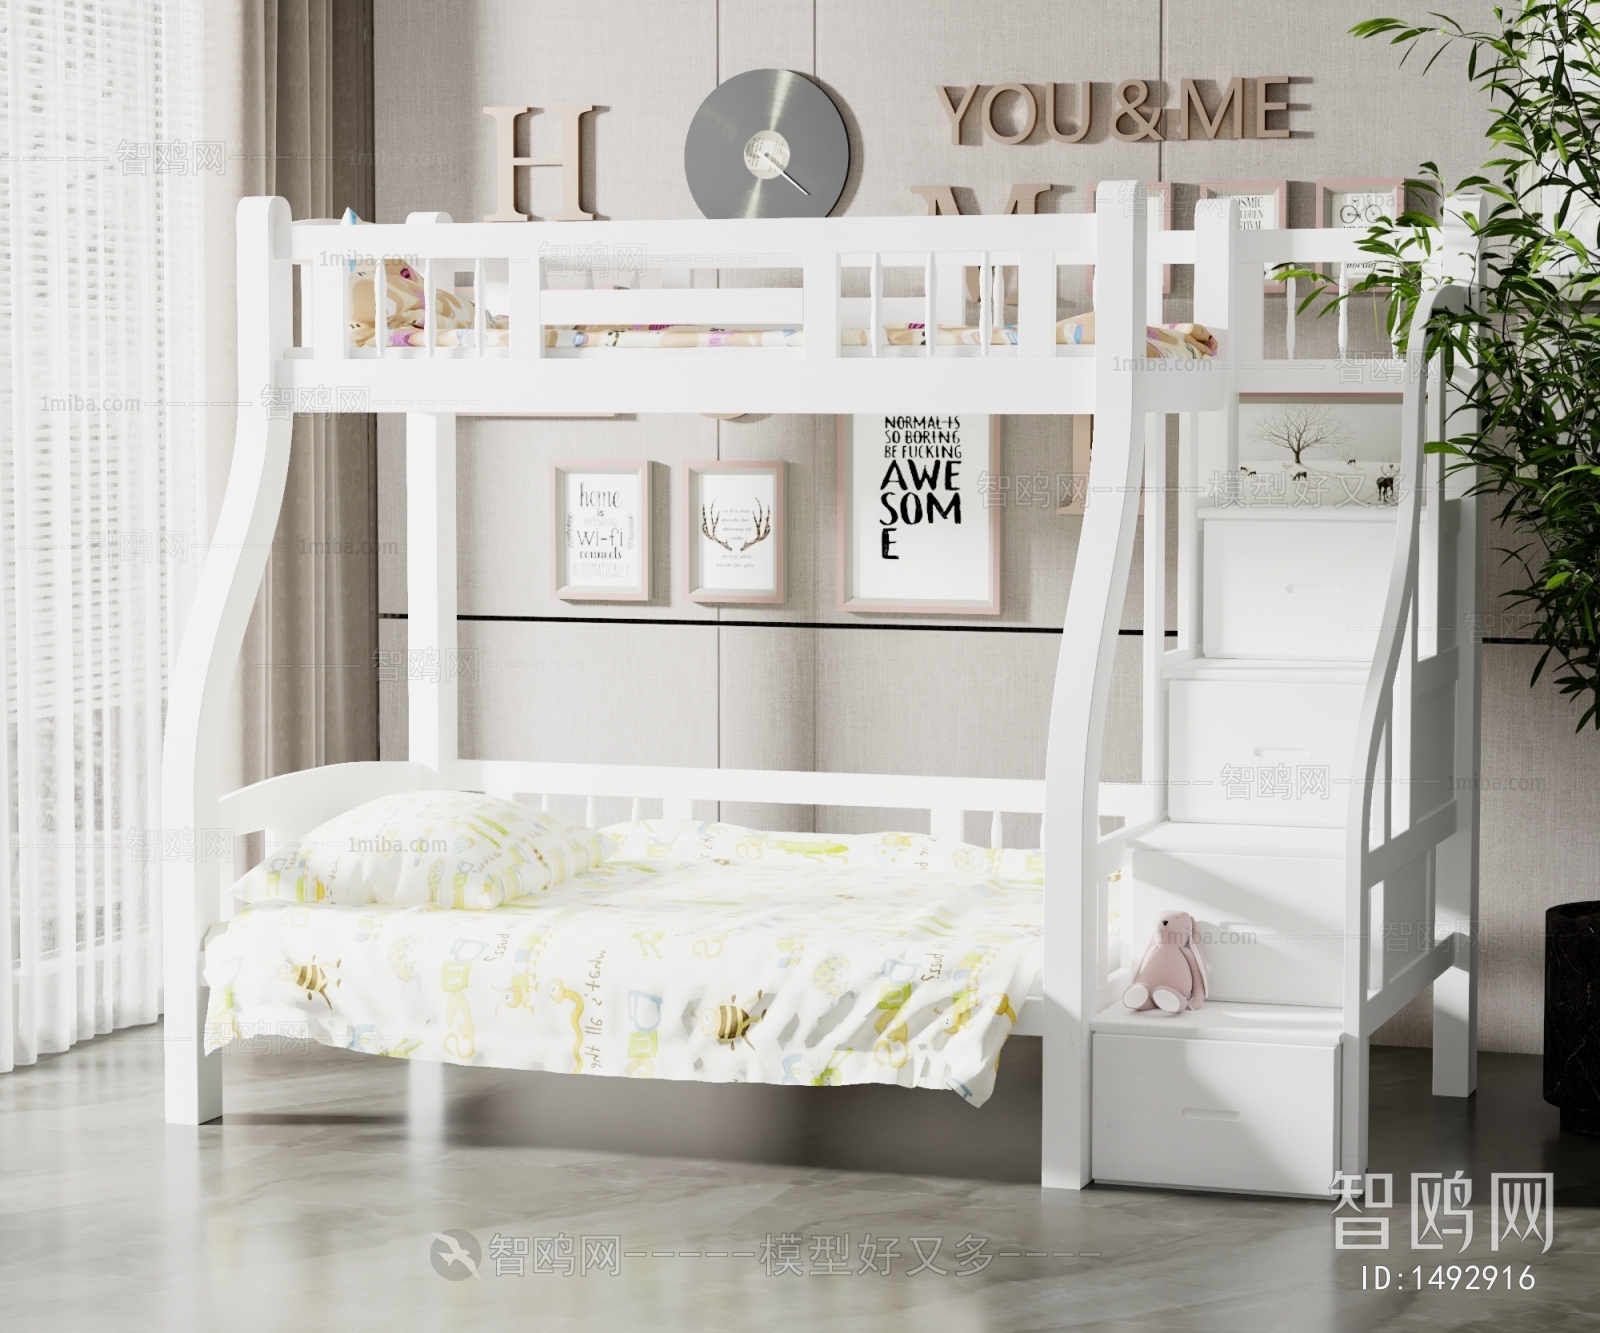 Simple European Style Bunk Bed